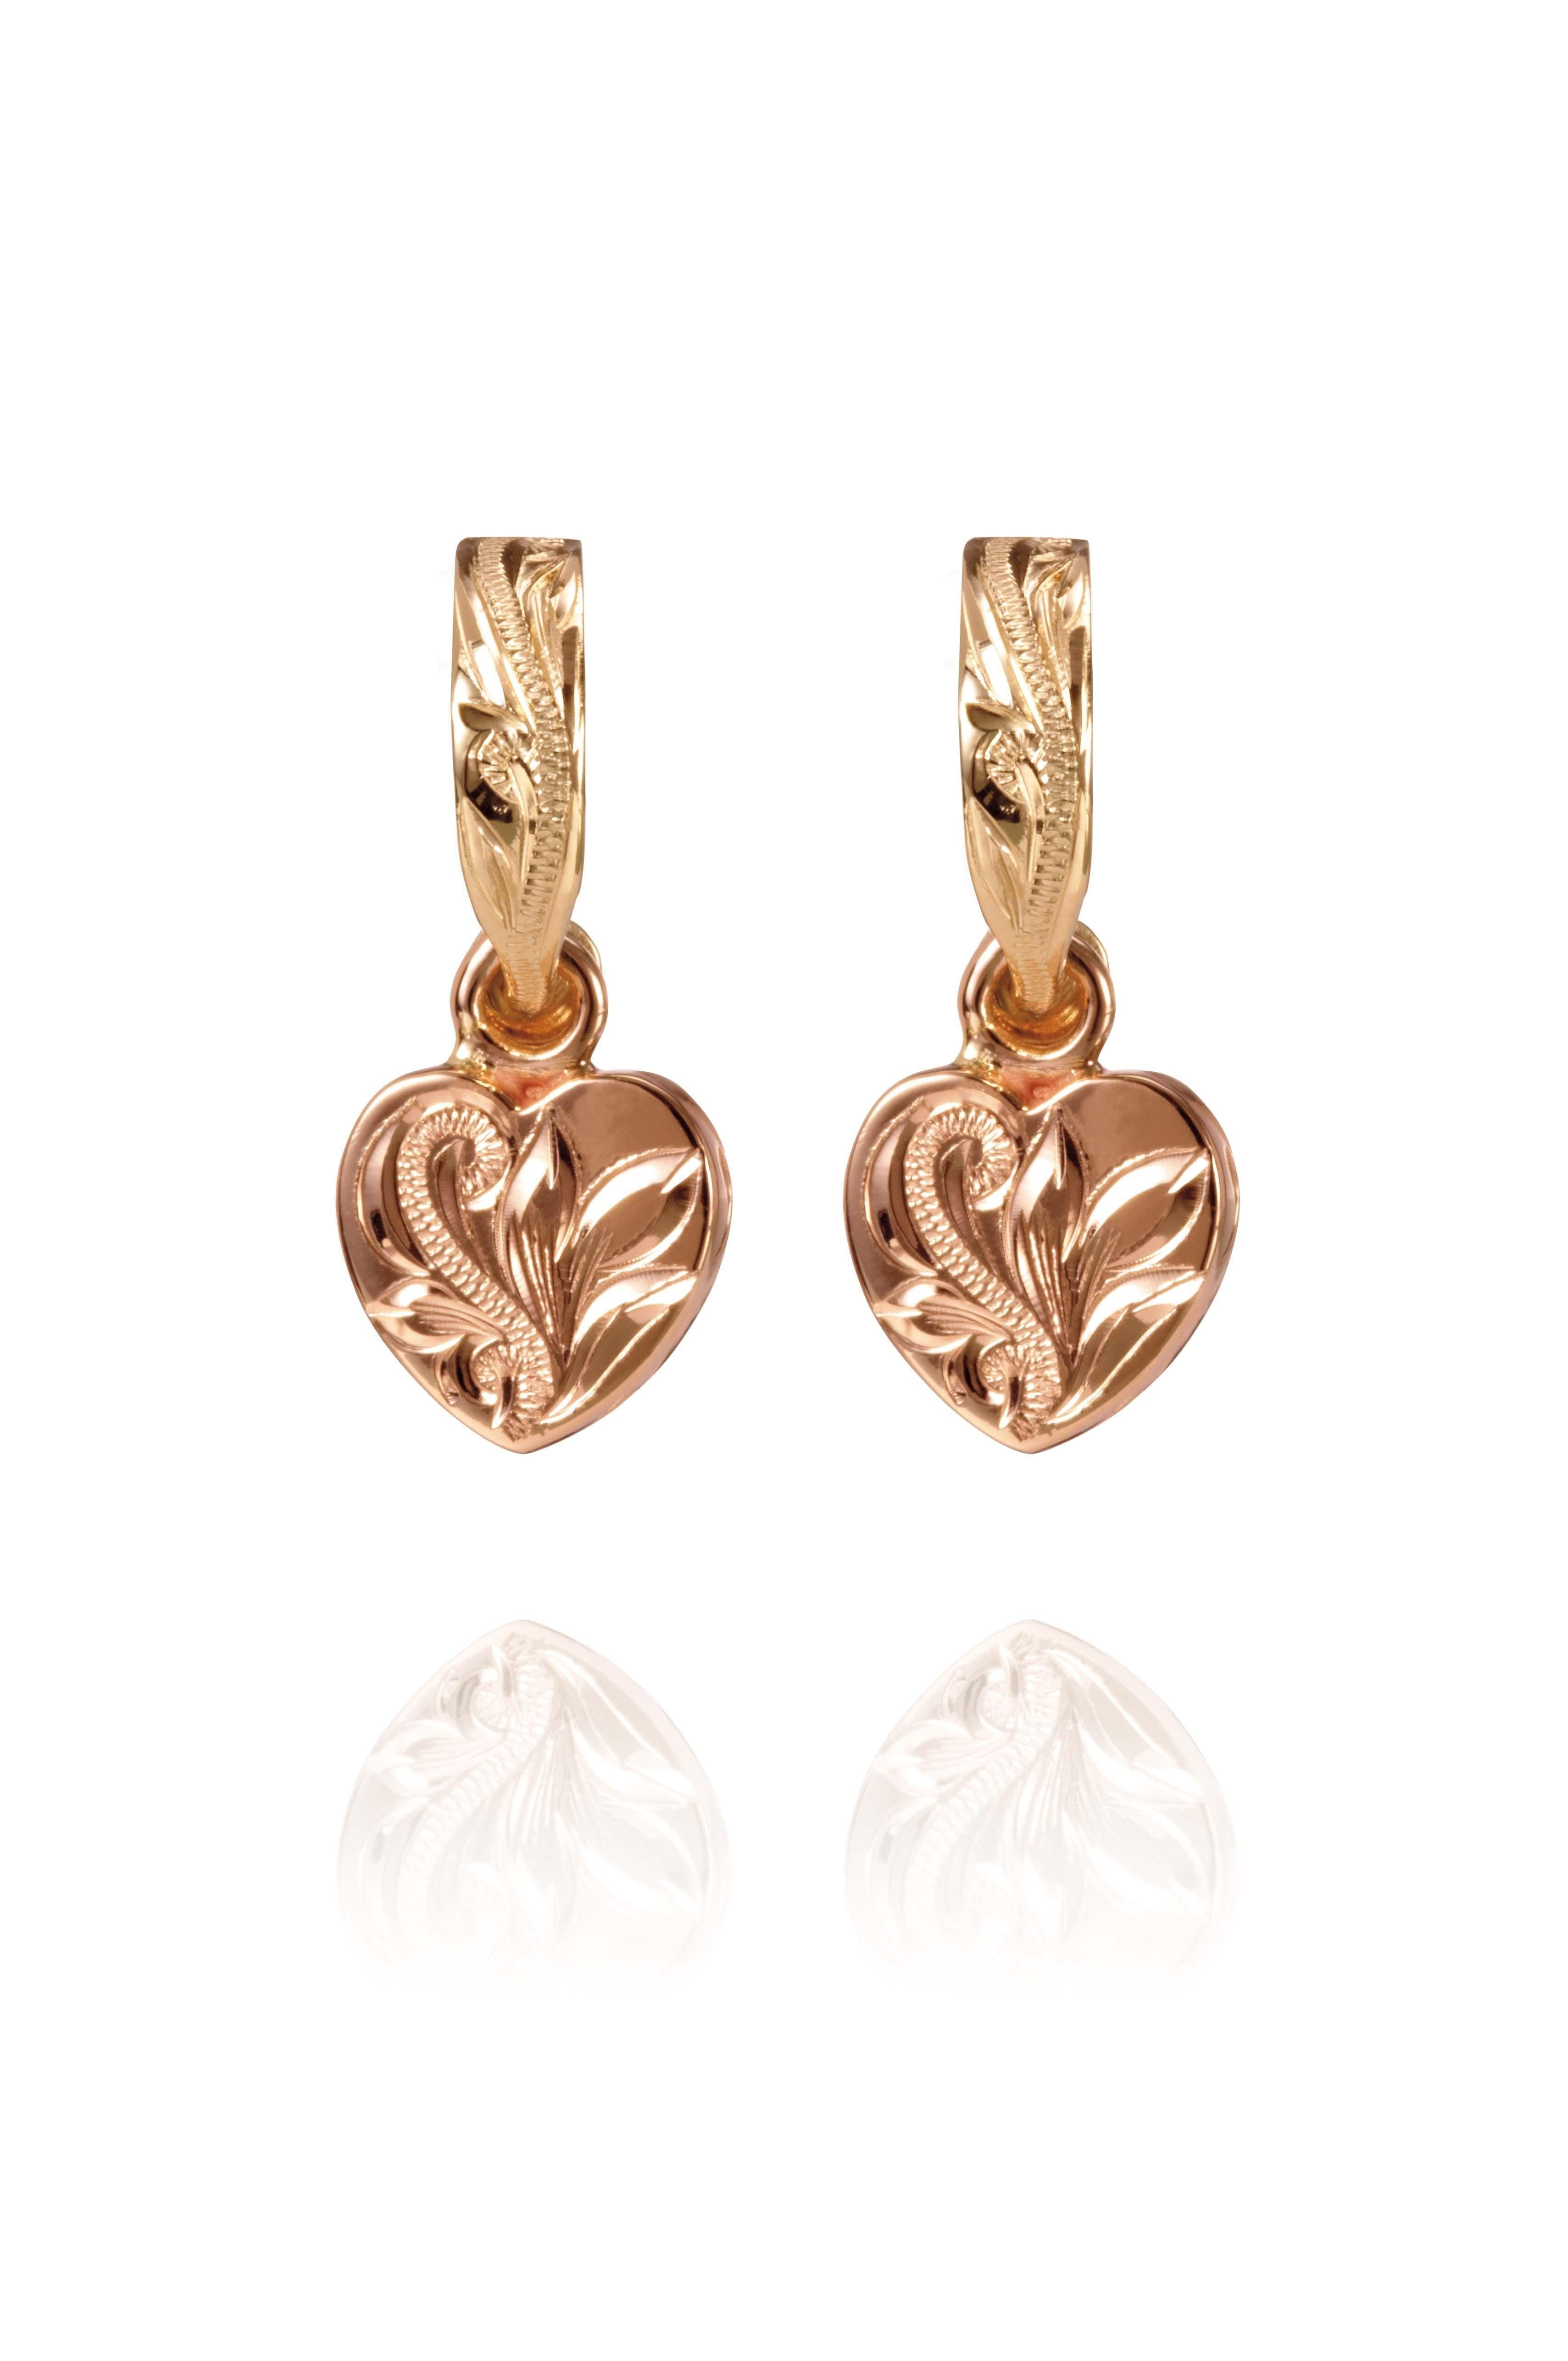 The picture shows a pair of 14K yellow and rose gold two-tone heart earrings with scroll engraving.